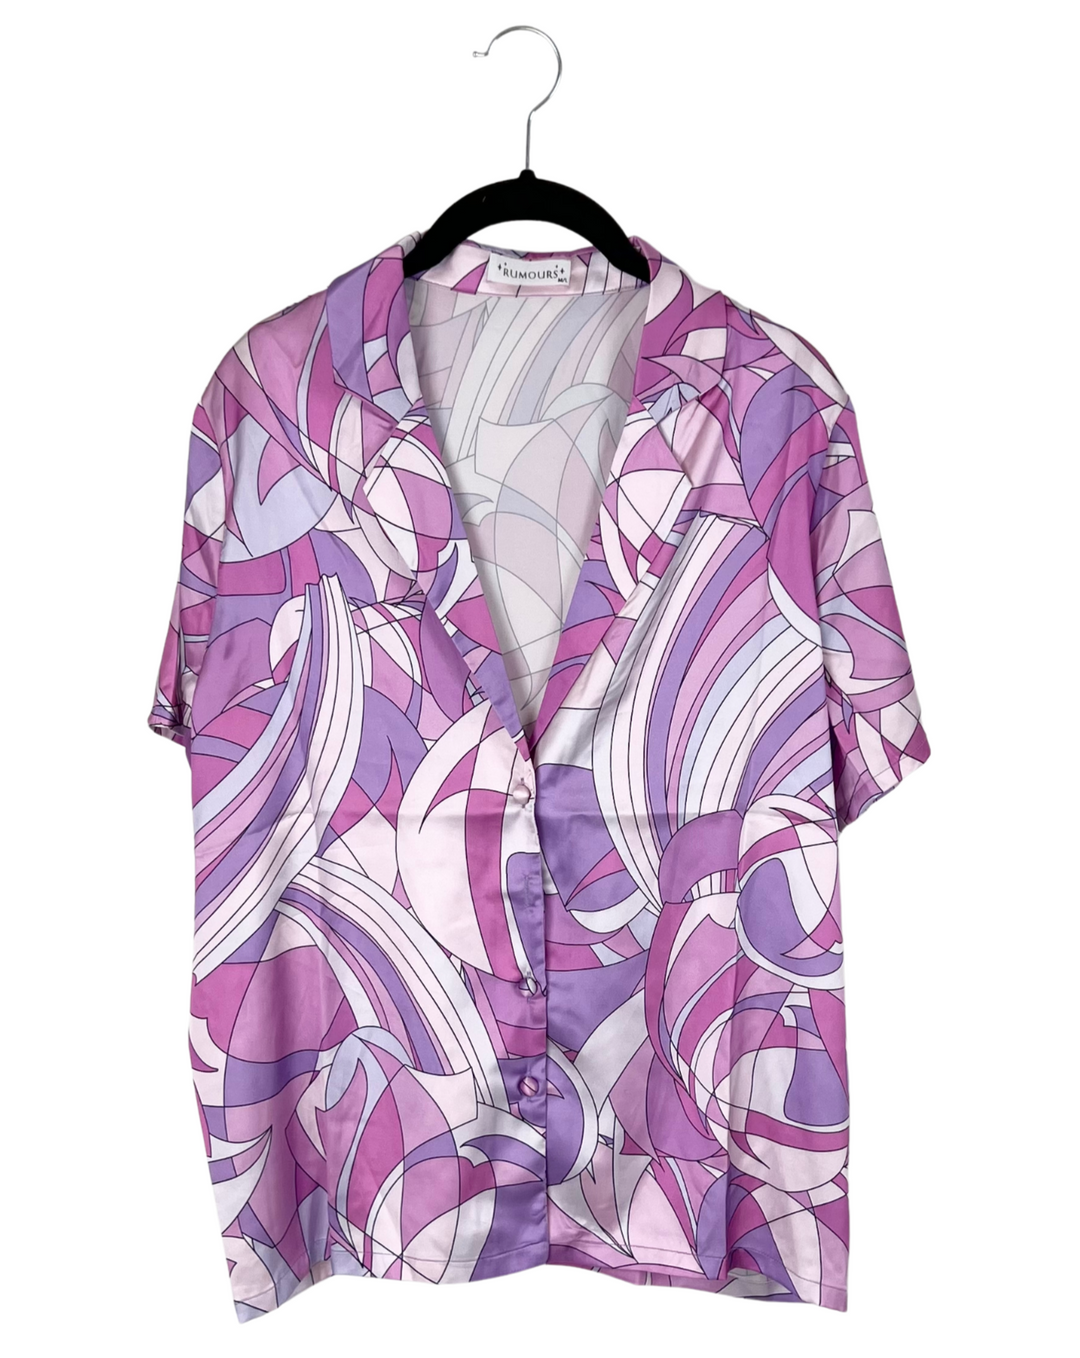 Purple and Pink Abstract Top - Small/Medium and Medium/Large